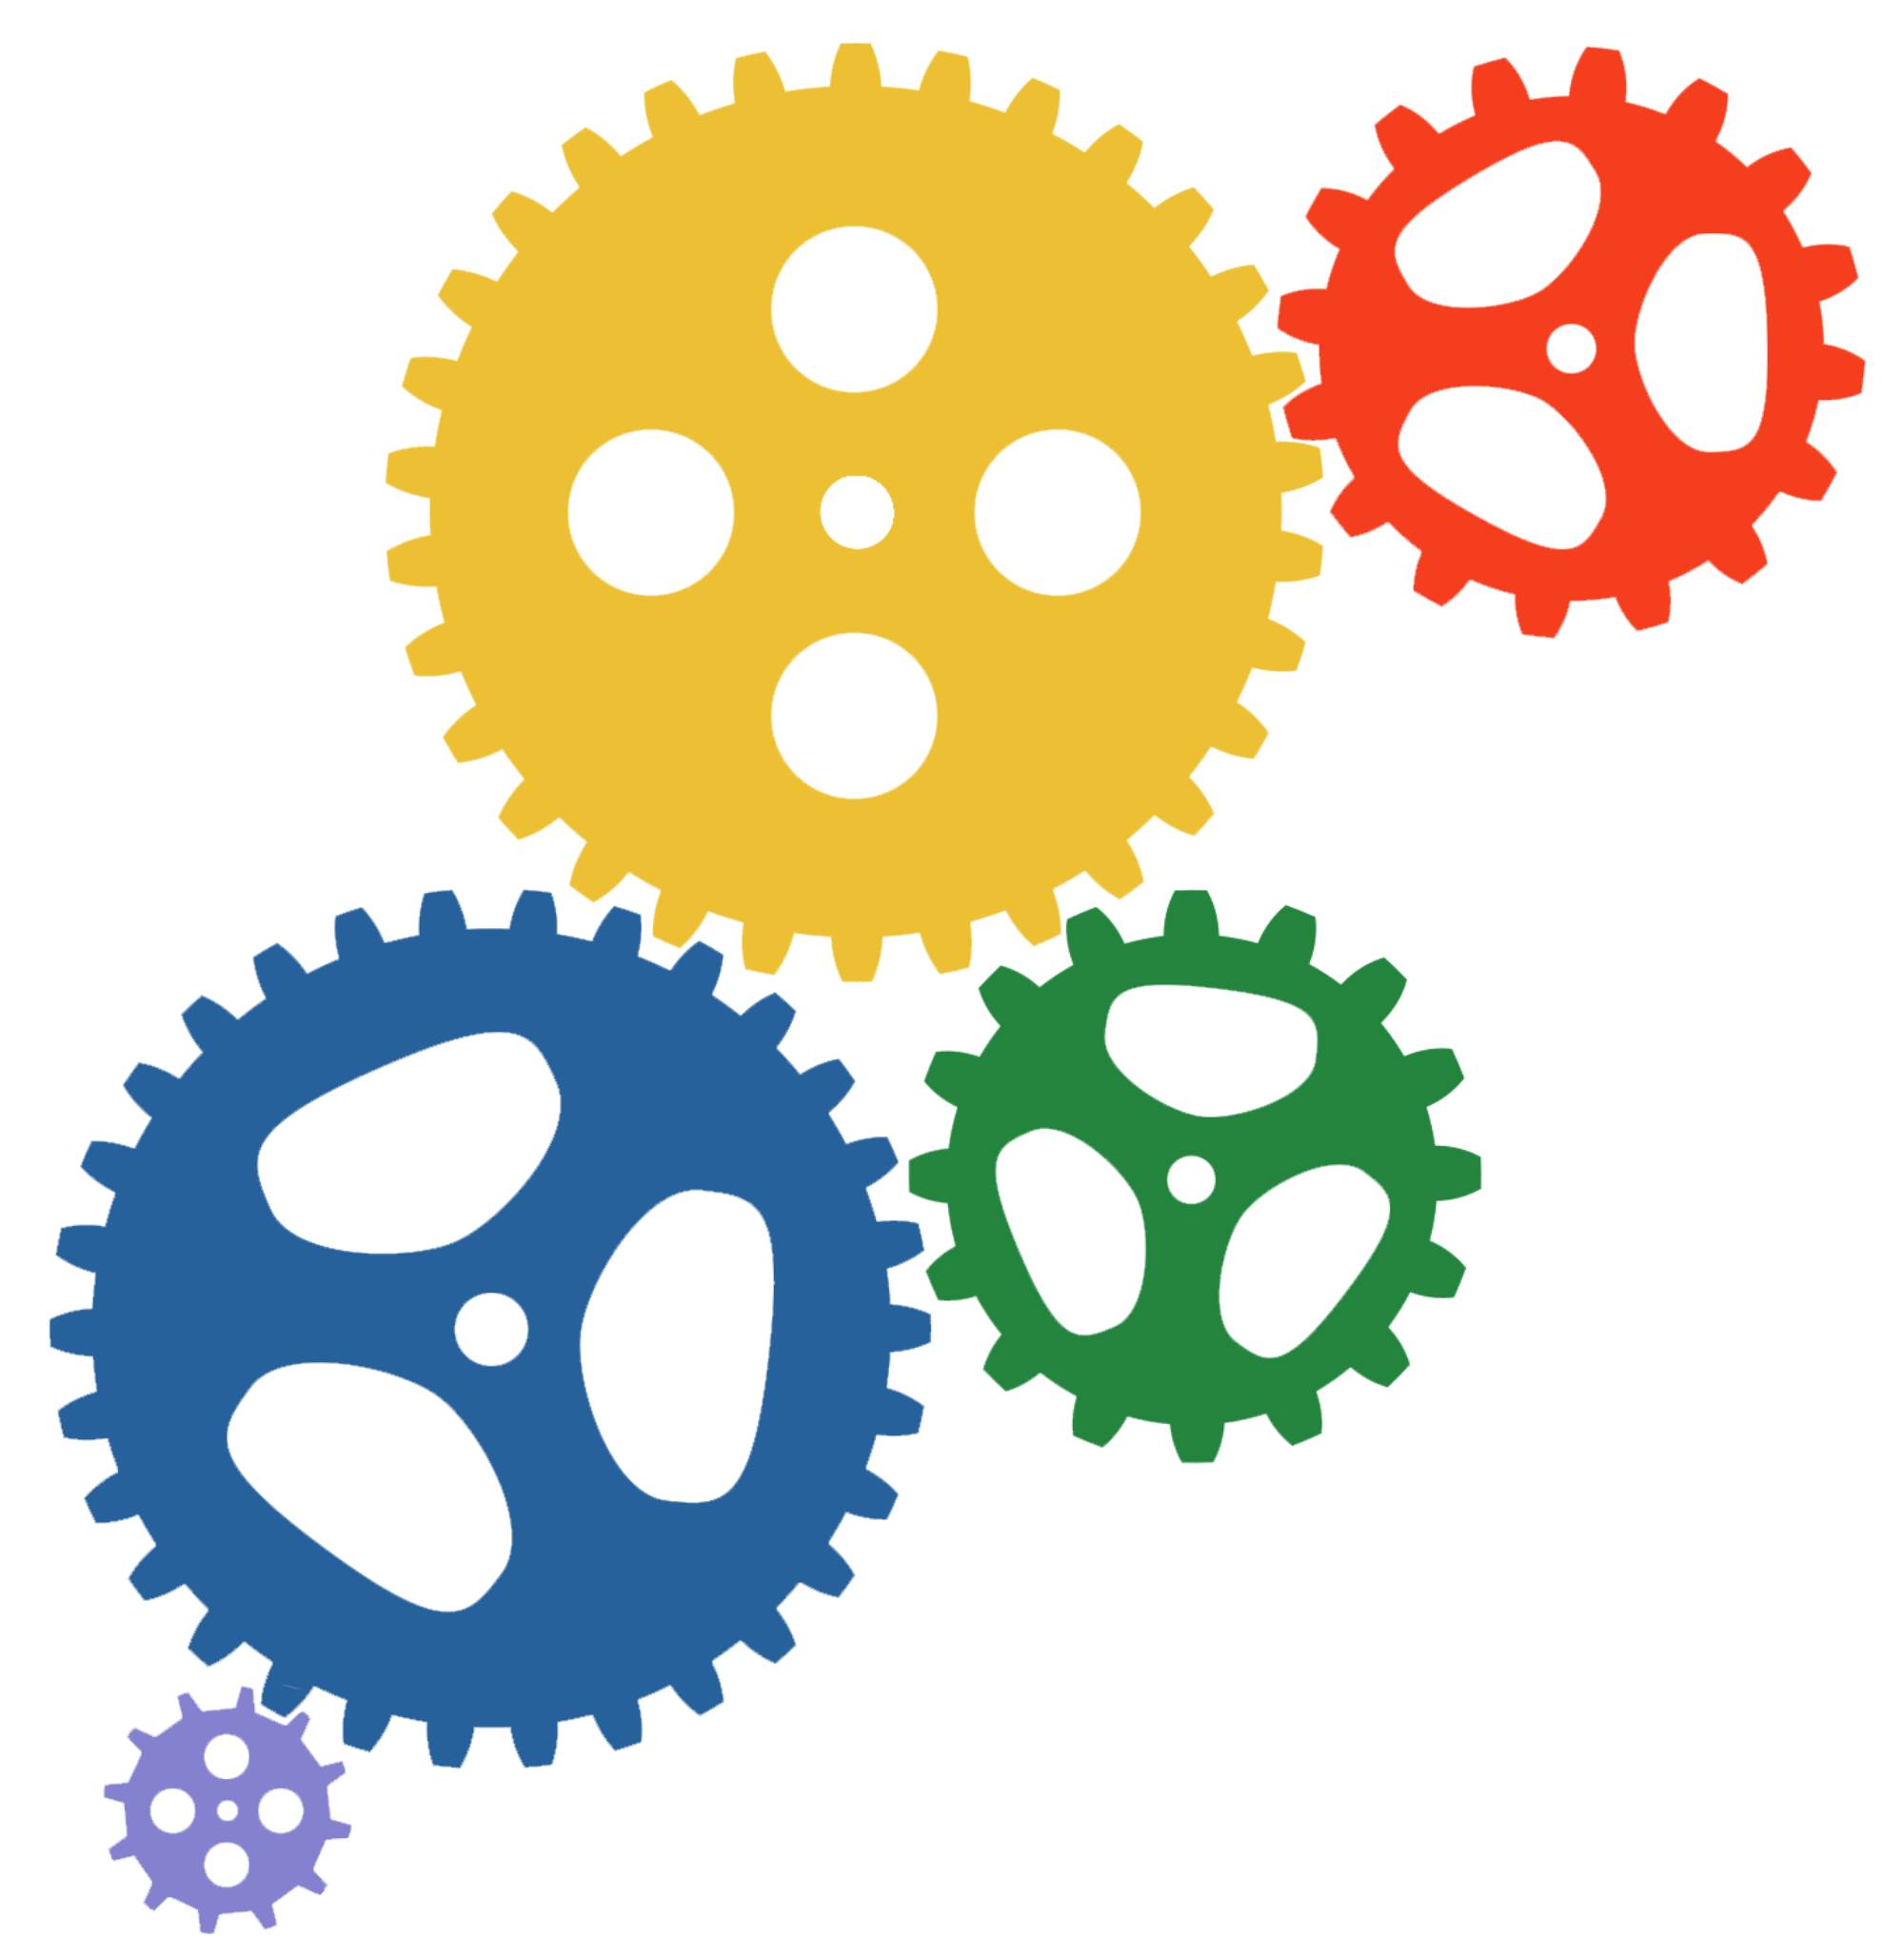 5 multicolor gears working together